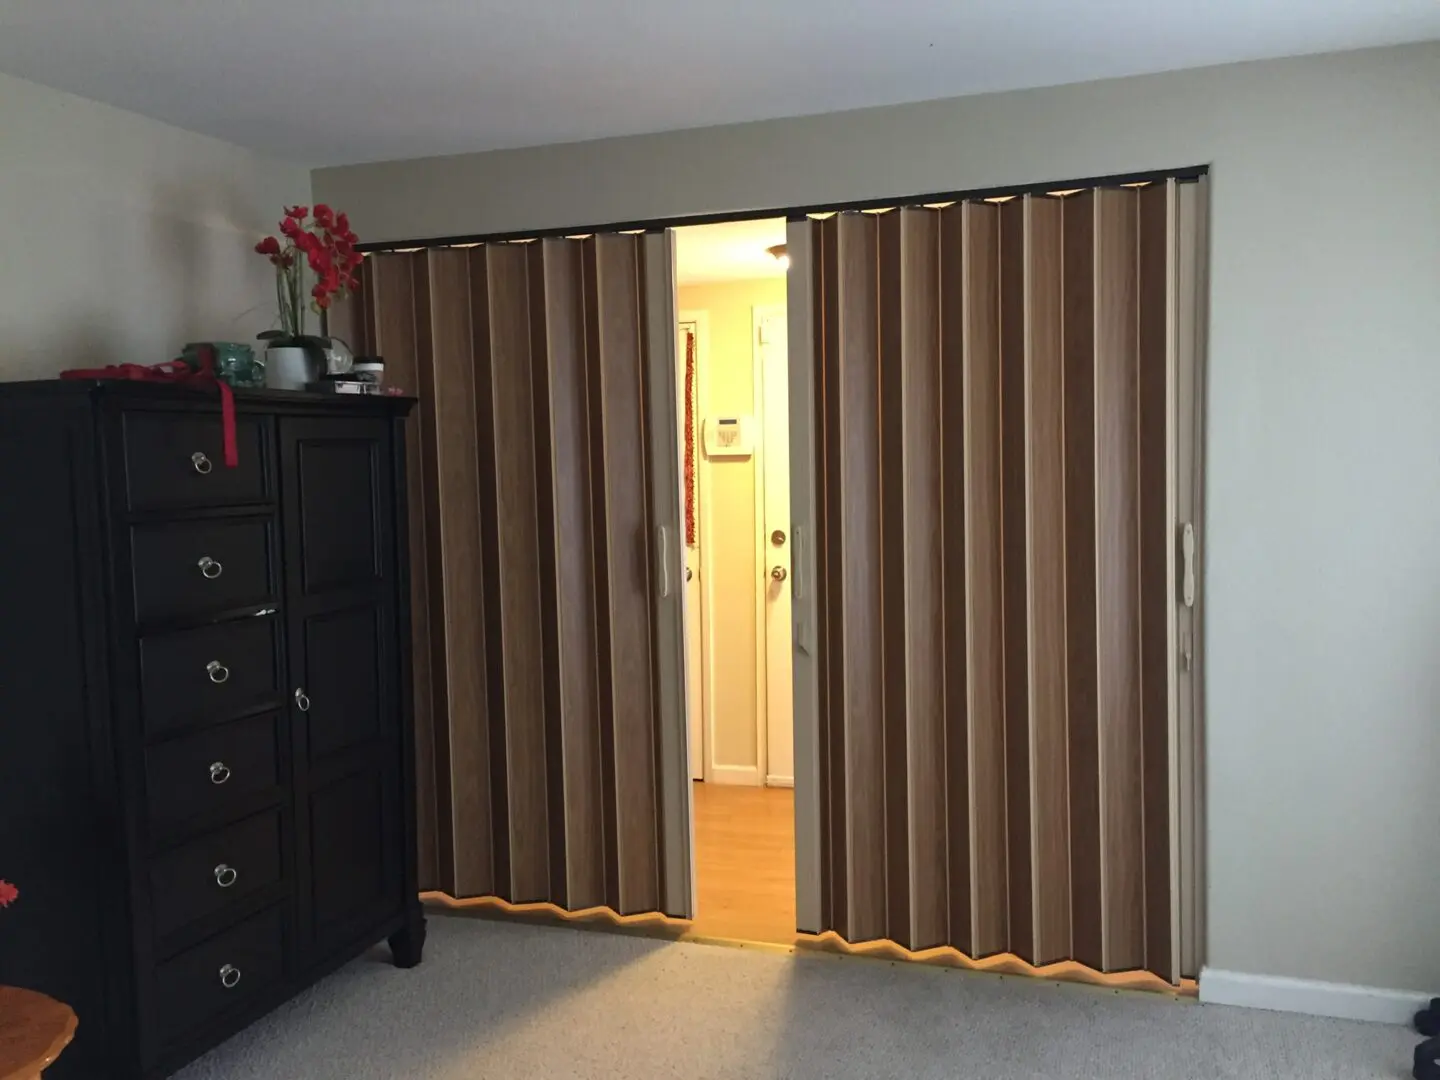 A room with two brown accordion doors and a black dresser.